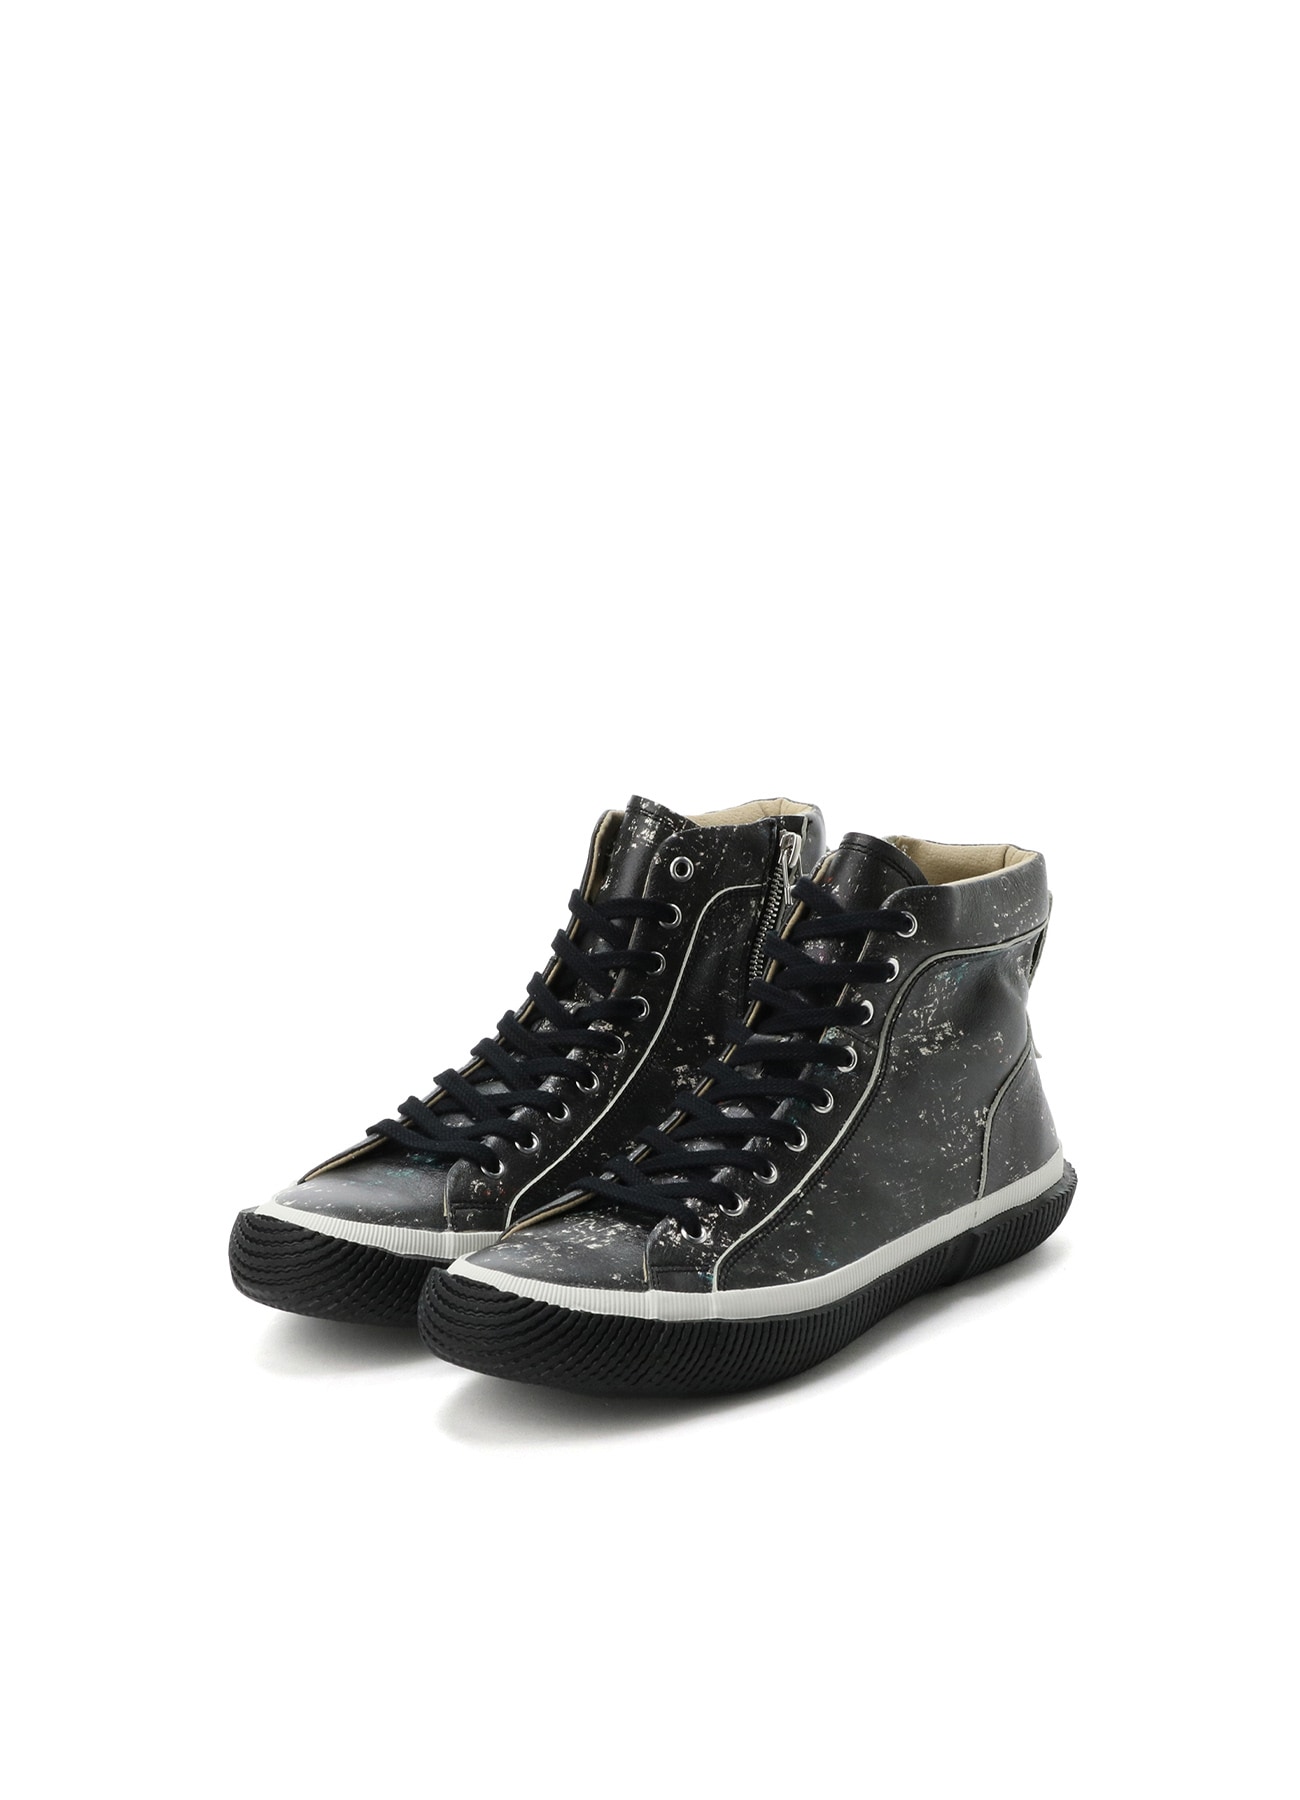 LEATHER SMOOTH HIGH-TOP SNEAKERS(23.5 Black): Vintage 1.1｜THE 